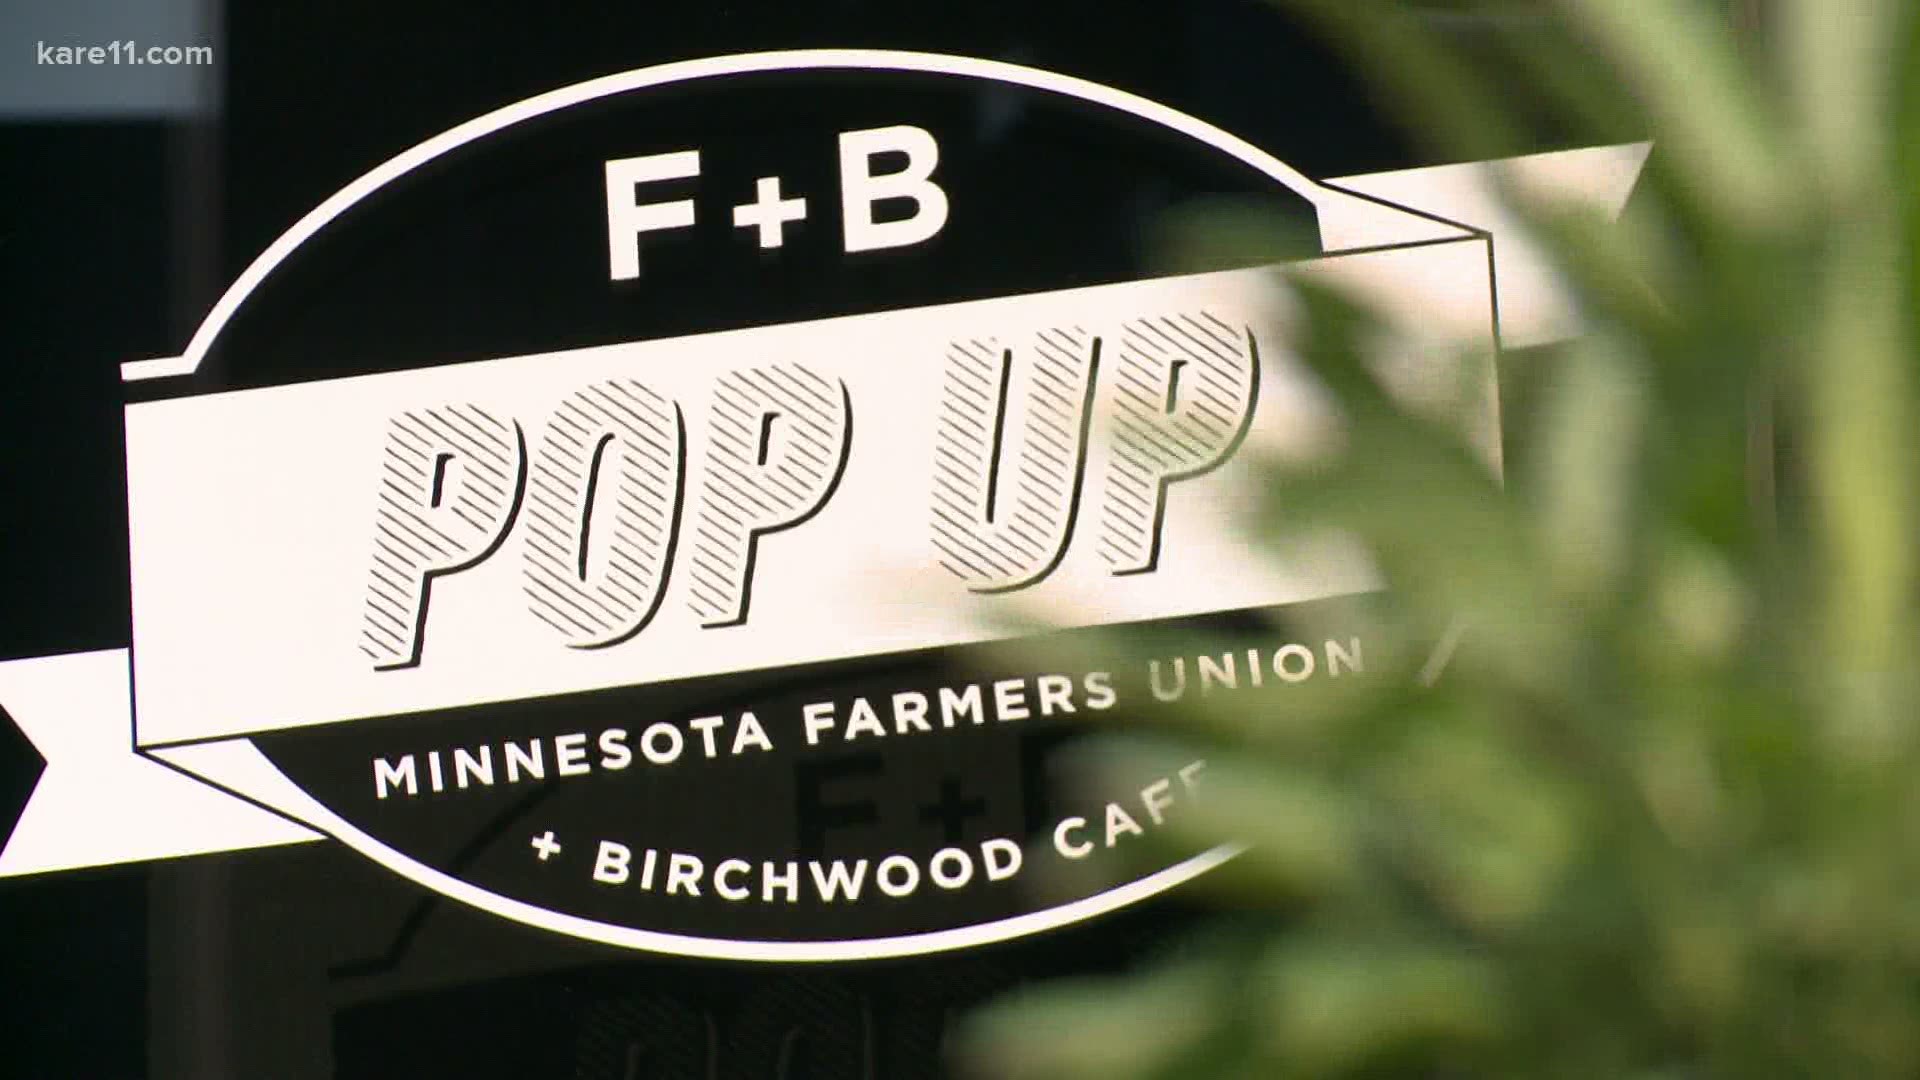 Minnesota Farmers Union and Birchwood Cafe recently opened F + B, a pop-up restaurant that includes fair favorites like the Heirloom Tomato + Sweet Corn BLT.